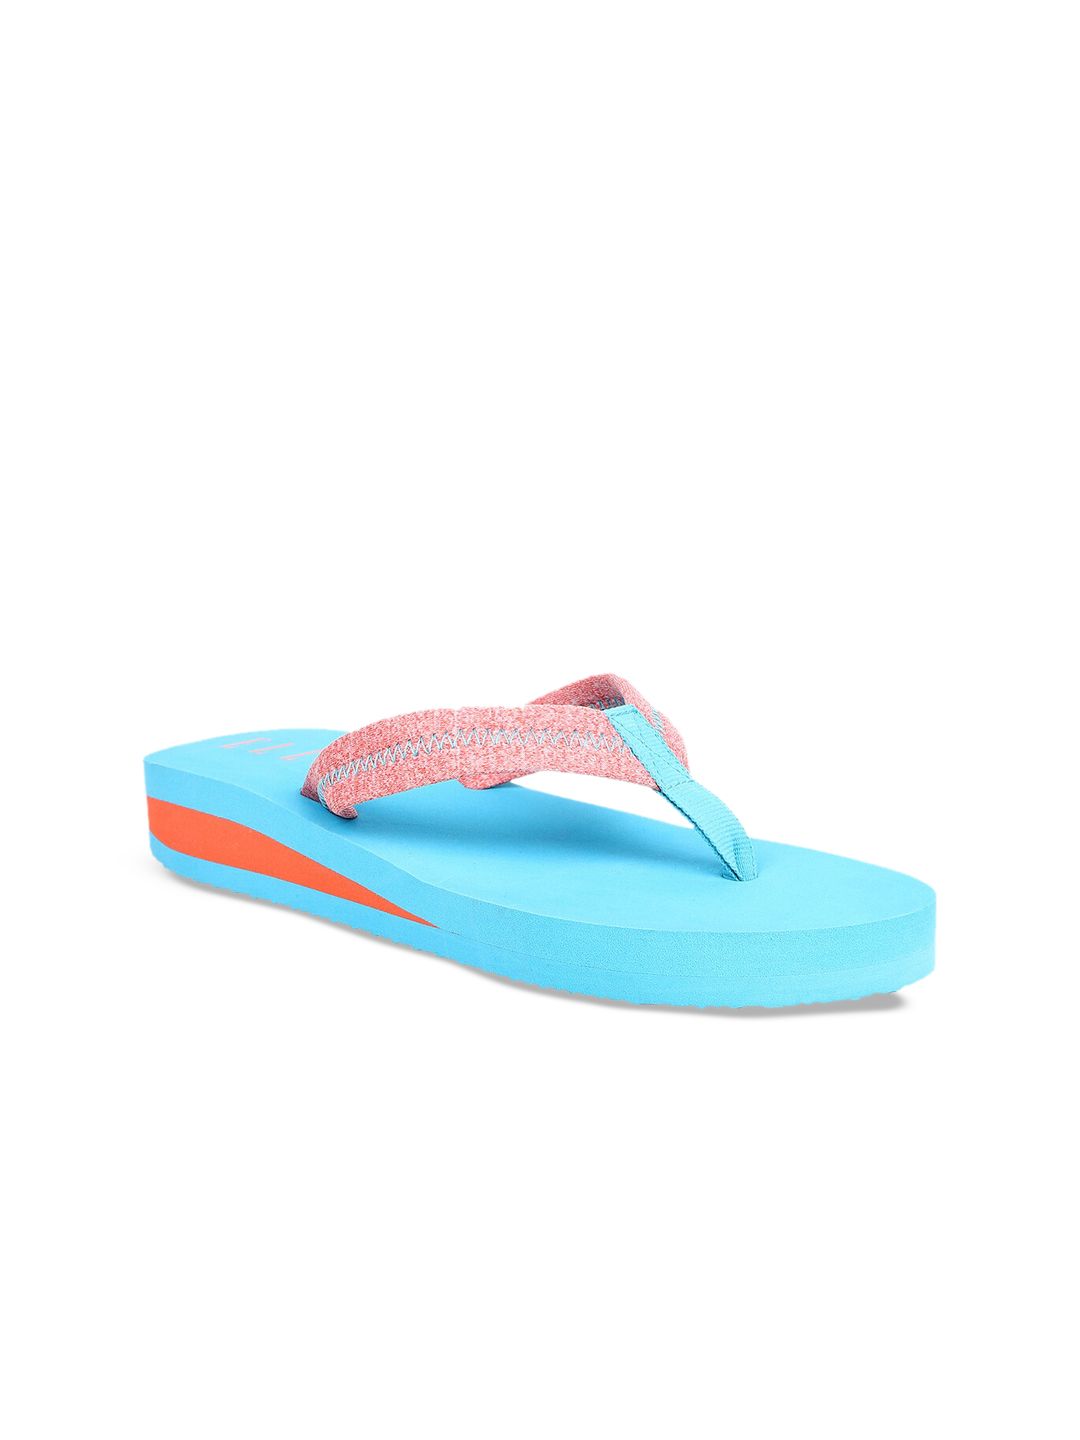 ELLE Women Turquoise Blue & Pink Solid Thong Flip-Flops Price in India